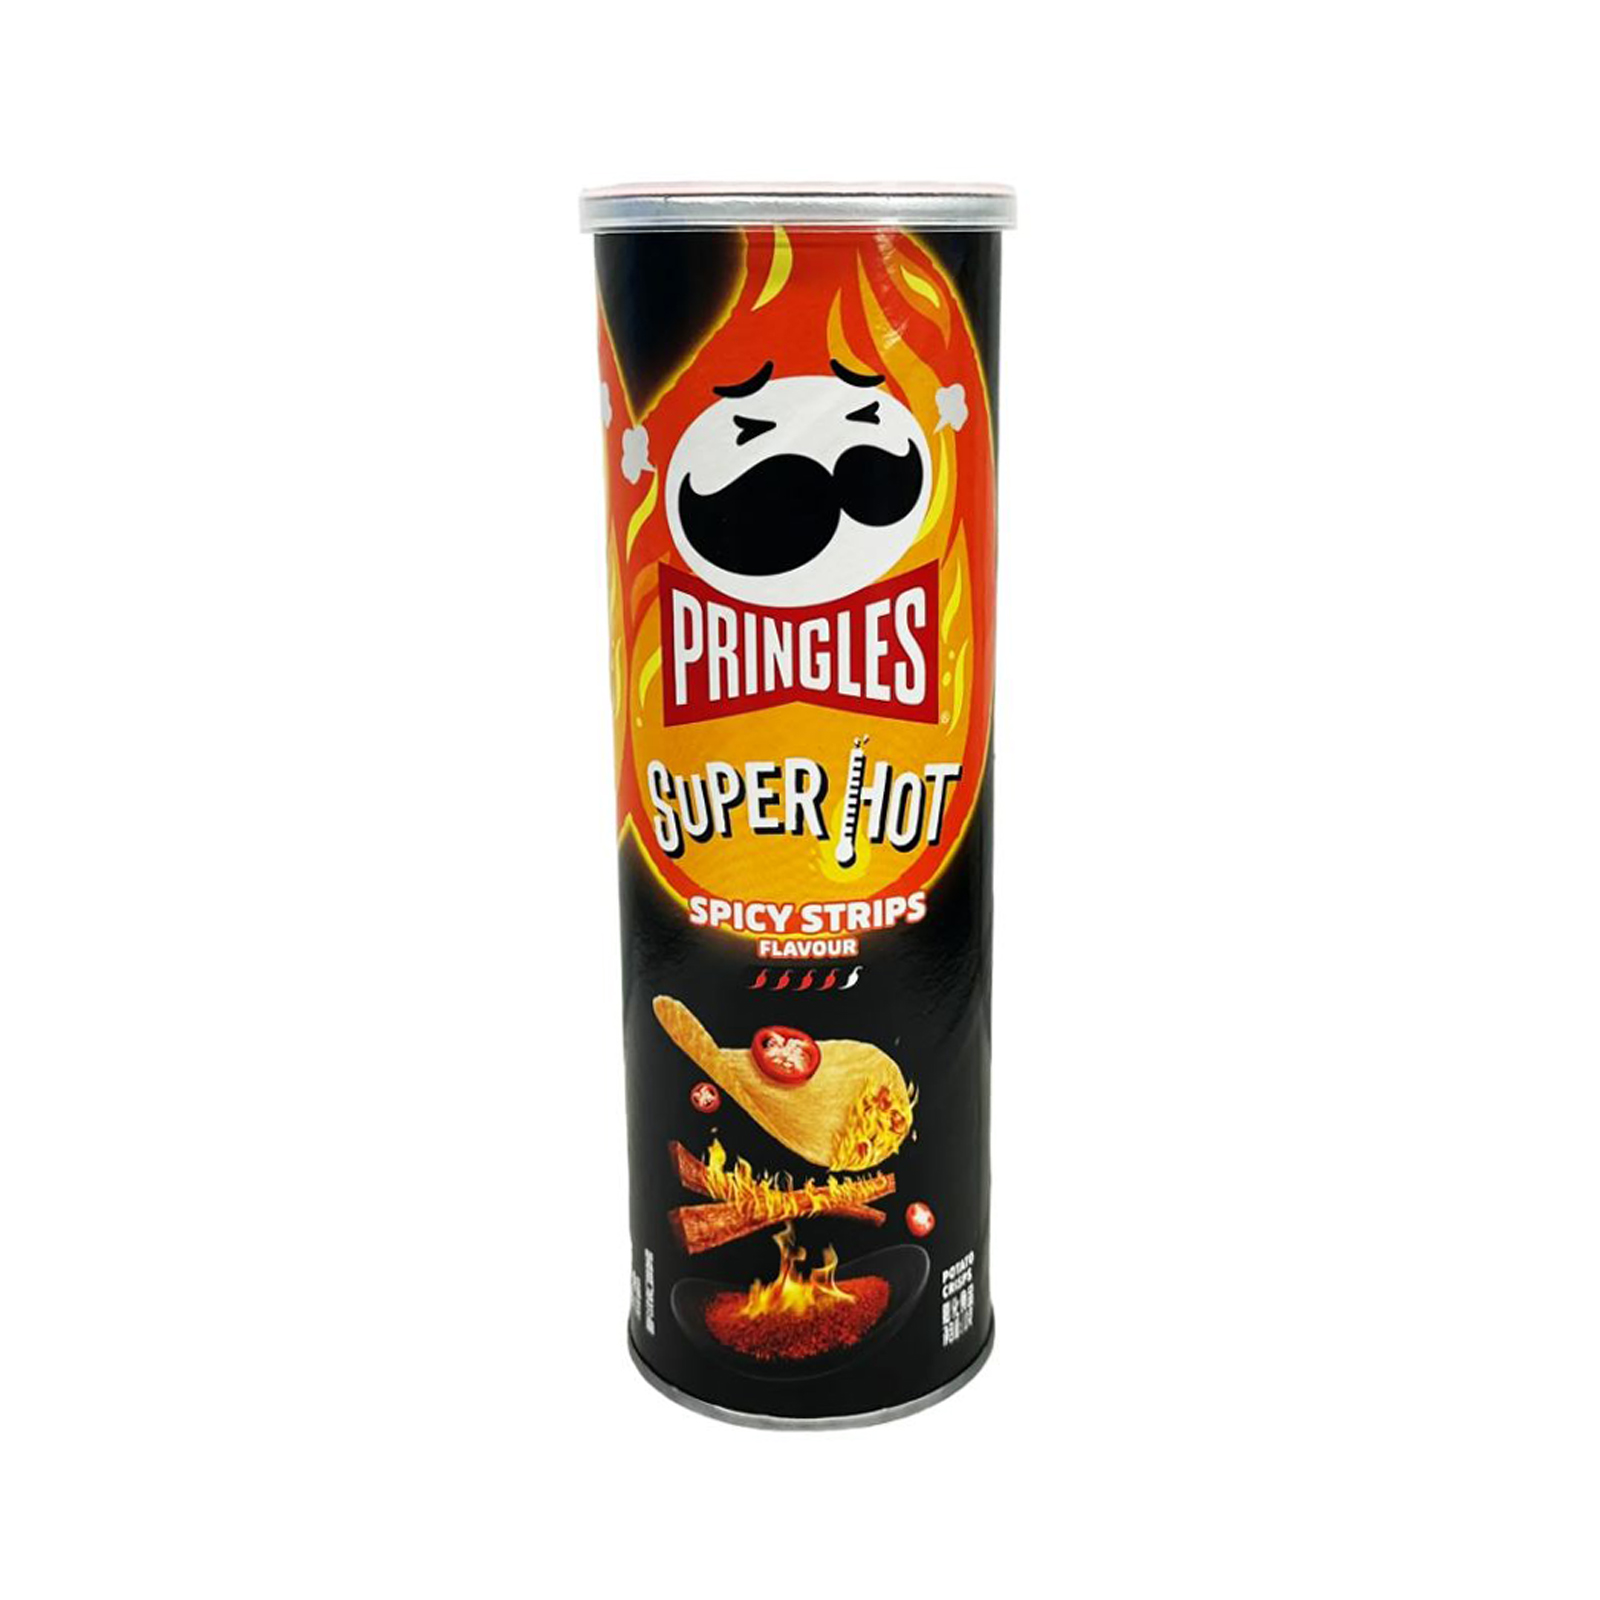 Pringles Super Hot Spicy Strips Products Cardinal